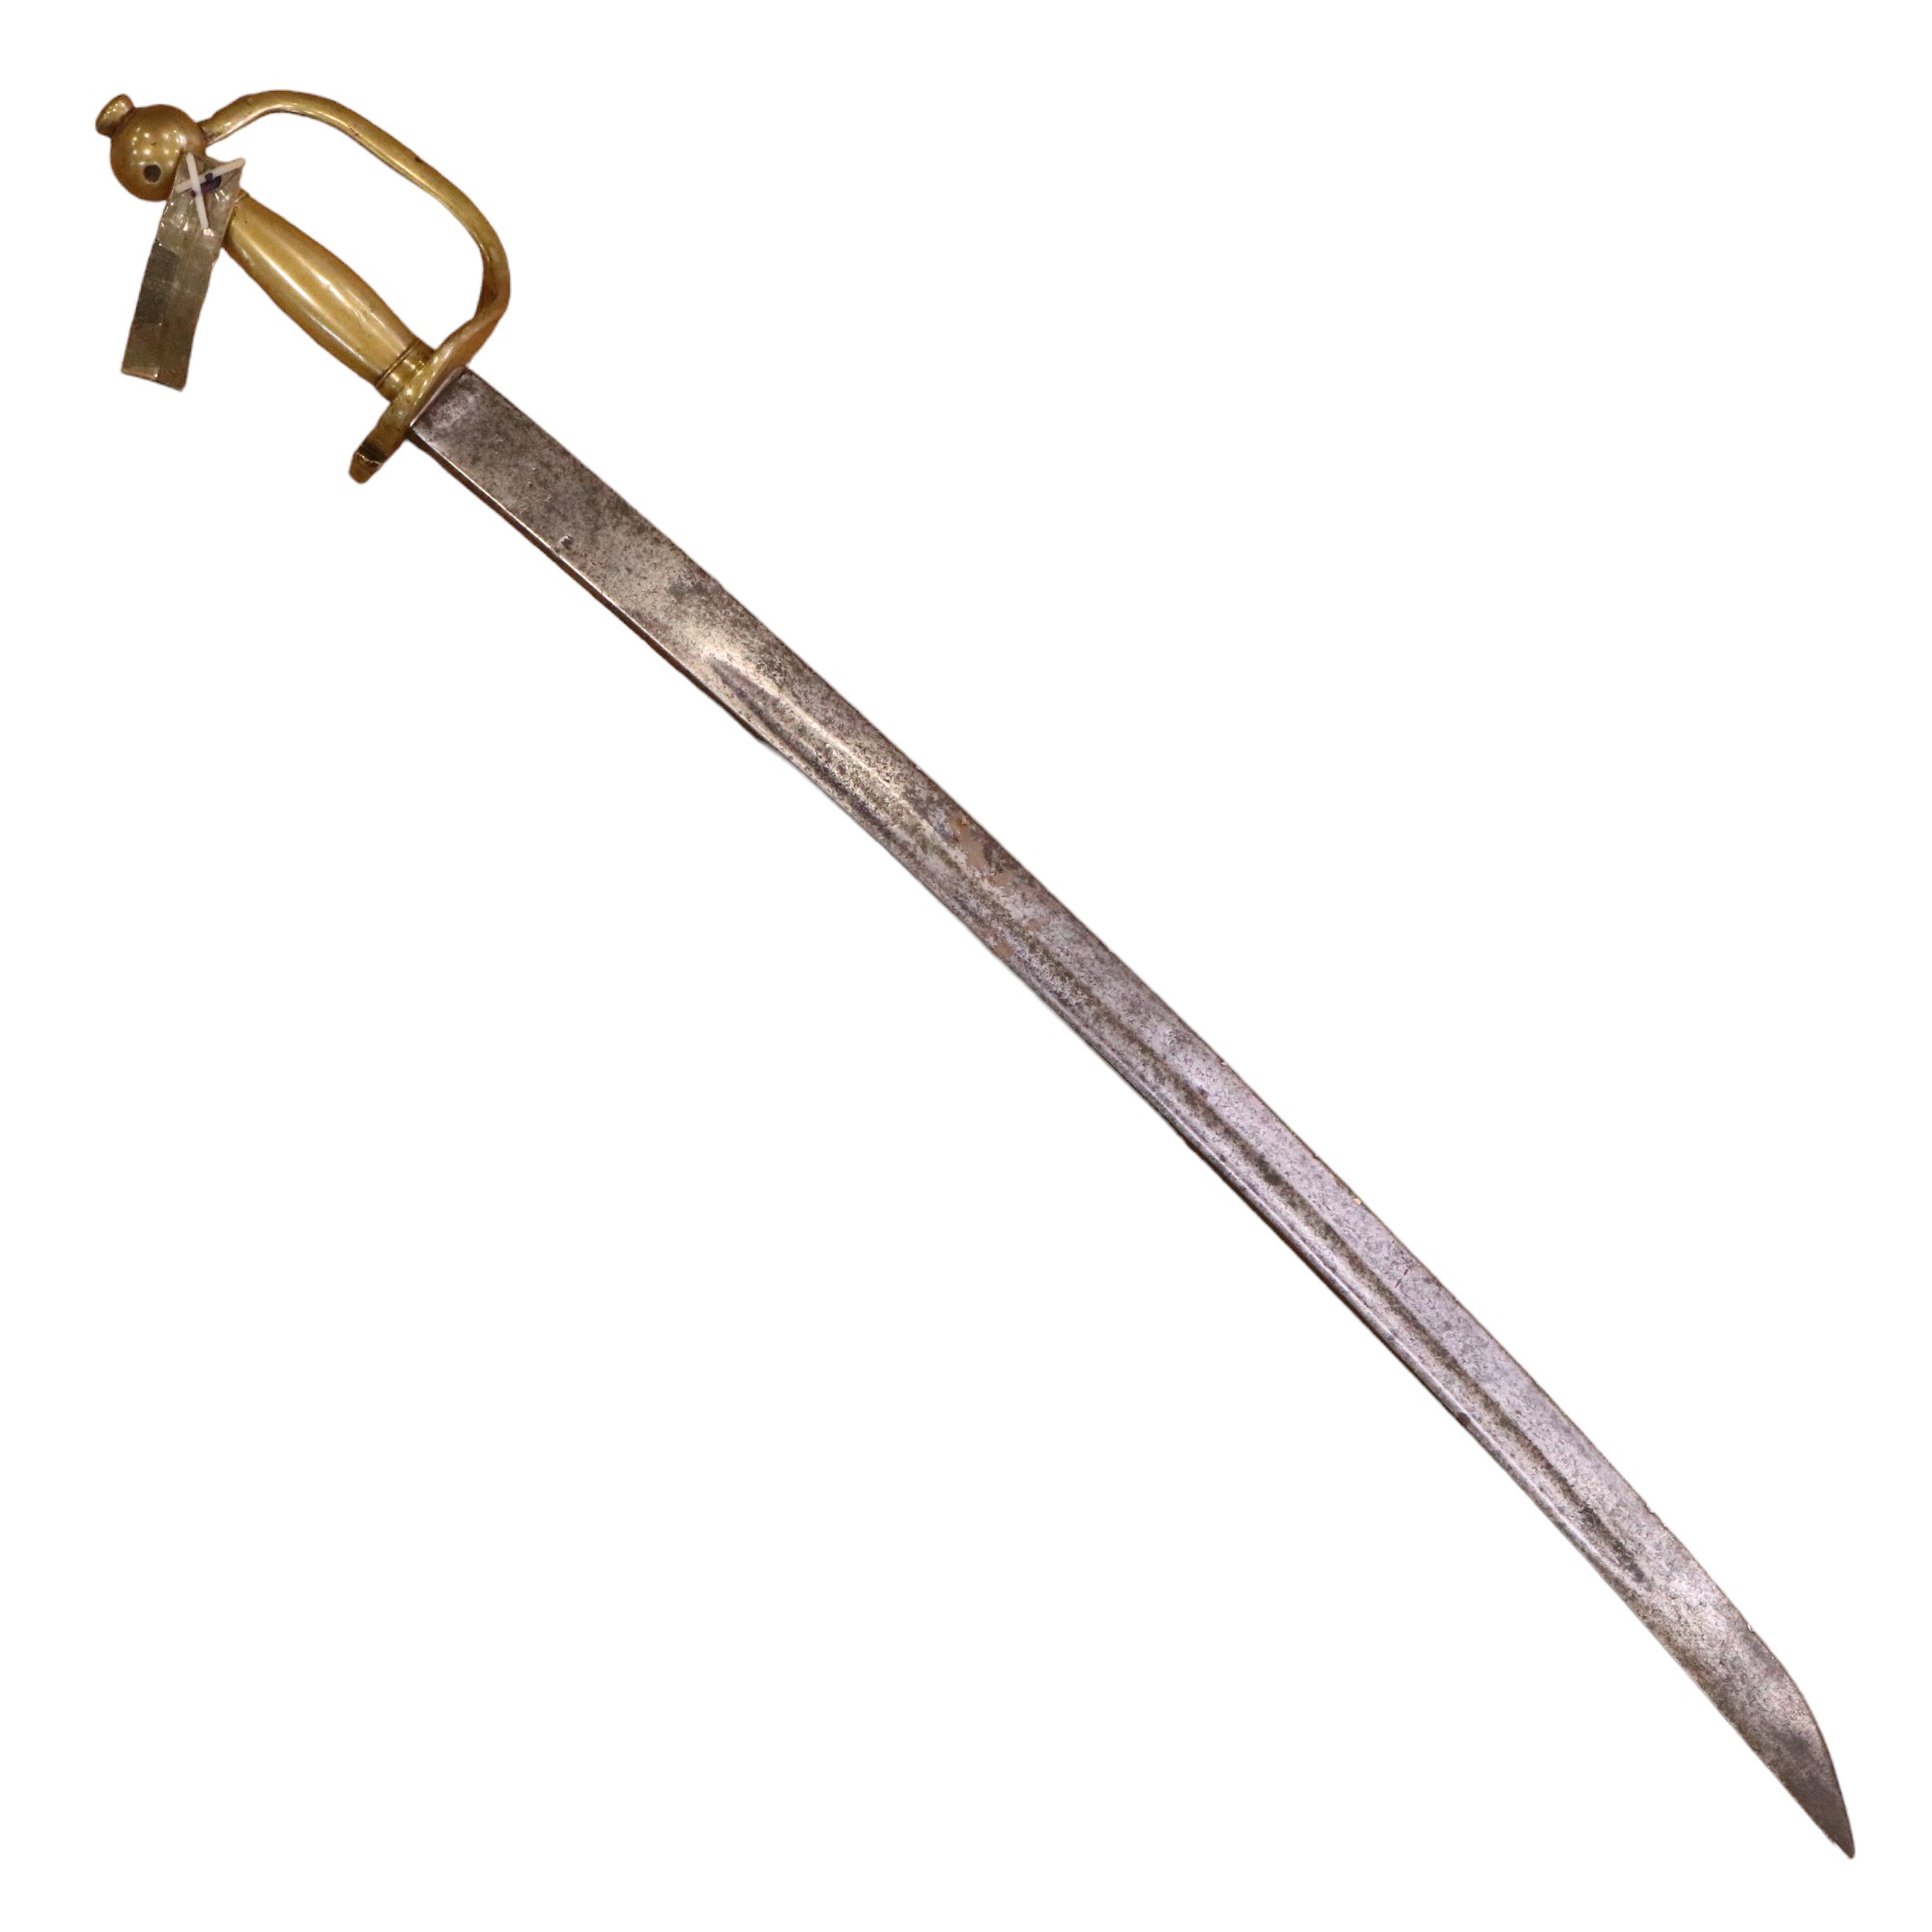 A mid-to-late 18th Century Russian / Prussian infantry short sword / hanger, 79 cm - Image 3 of 3